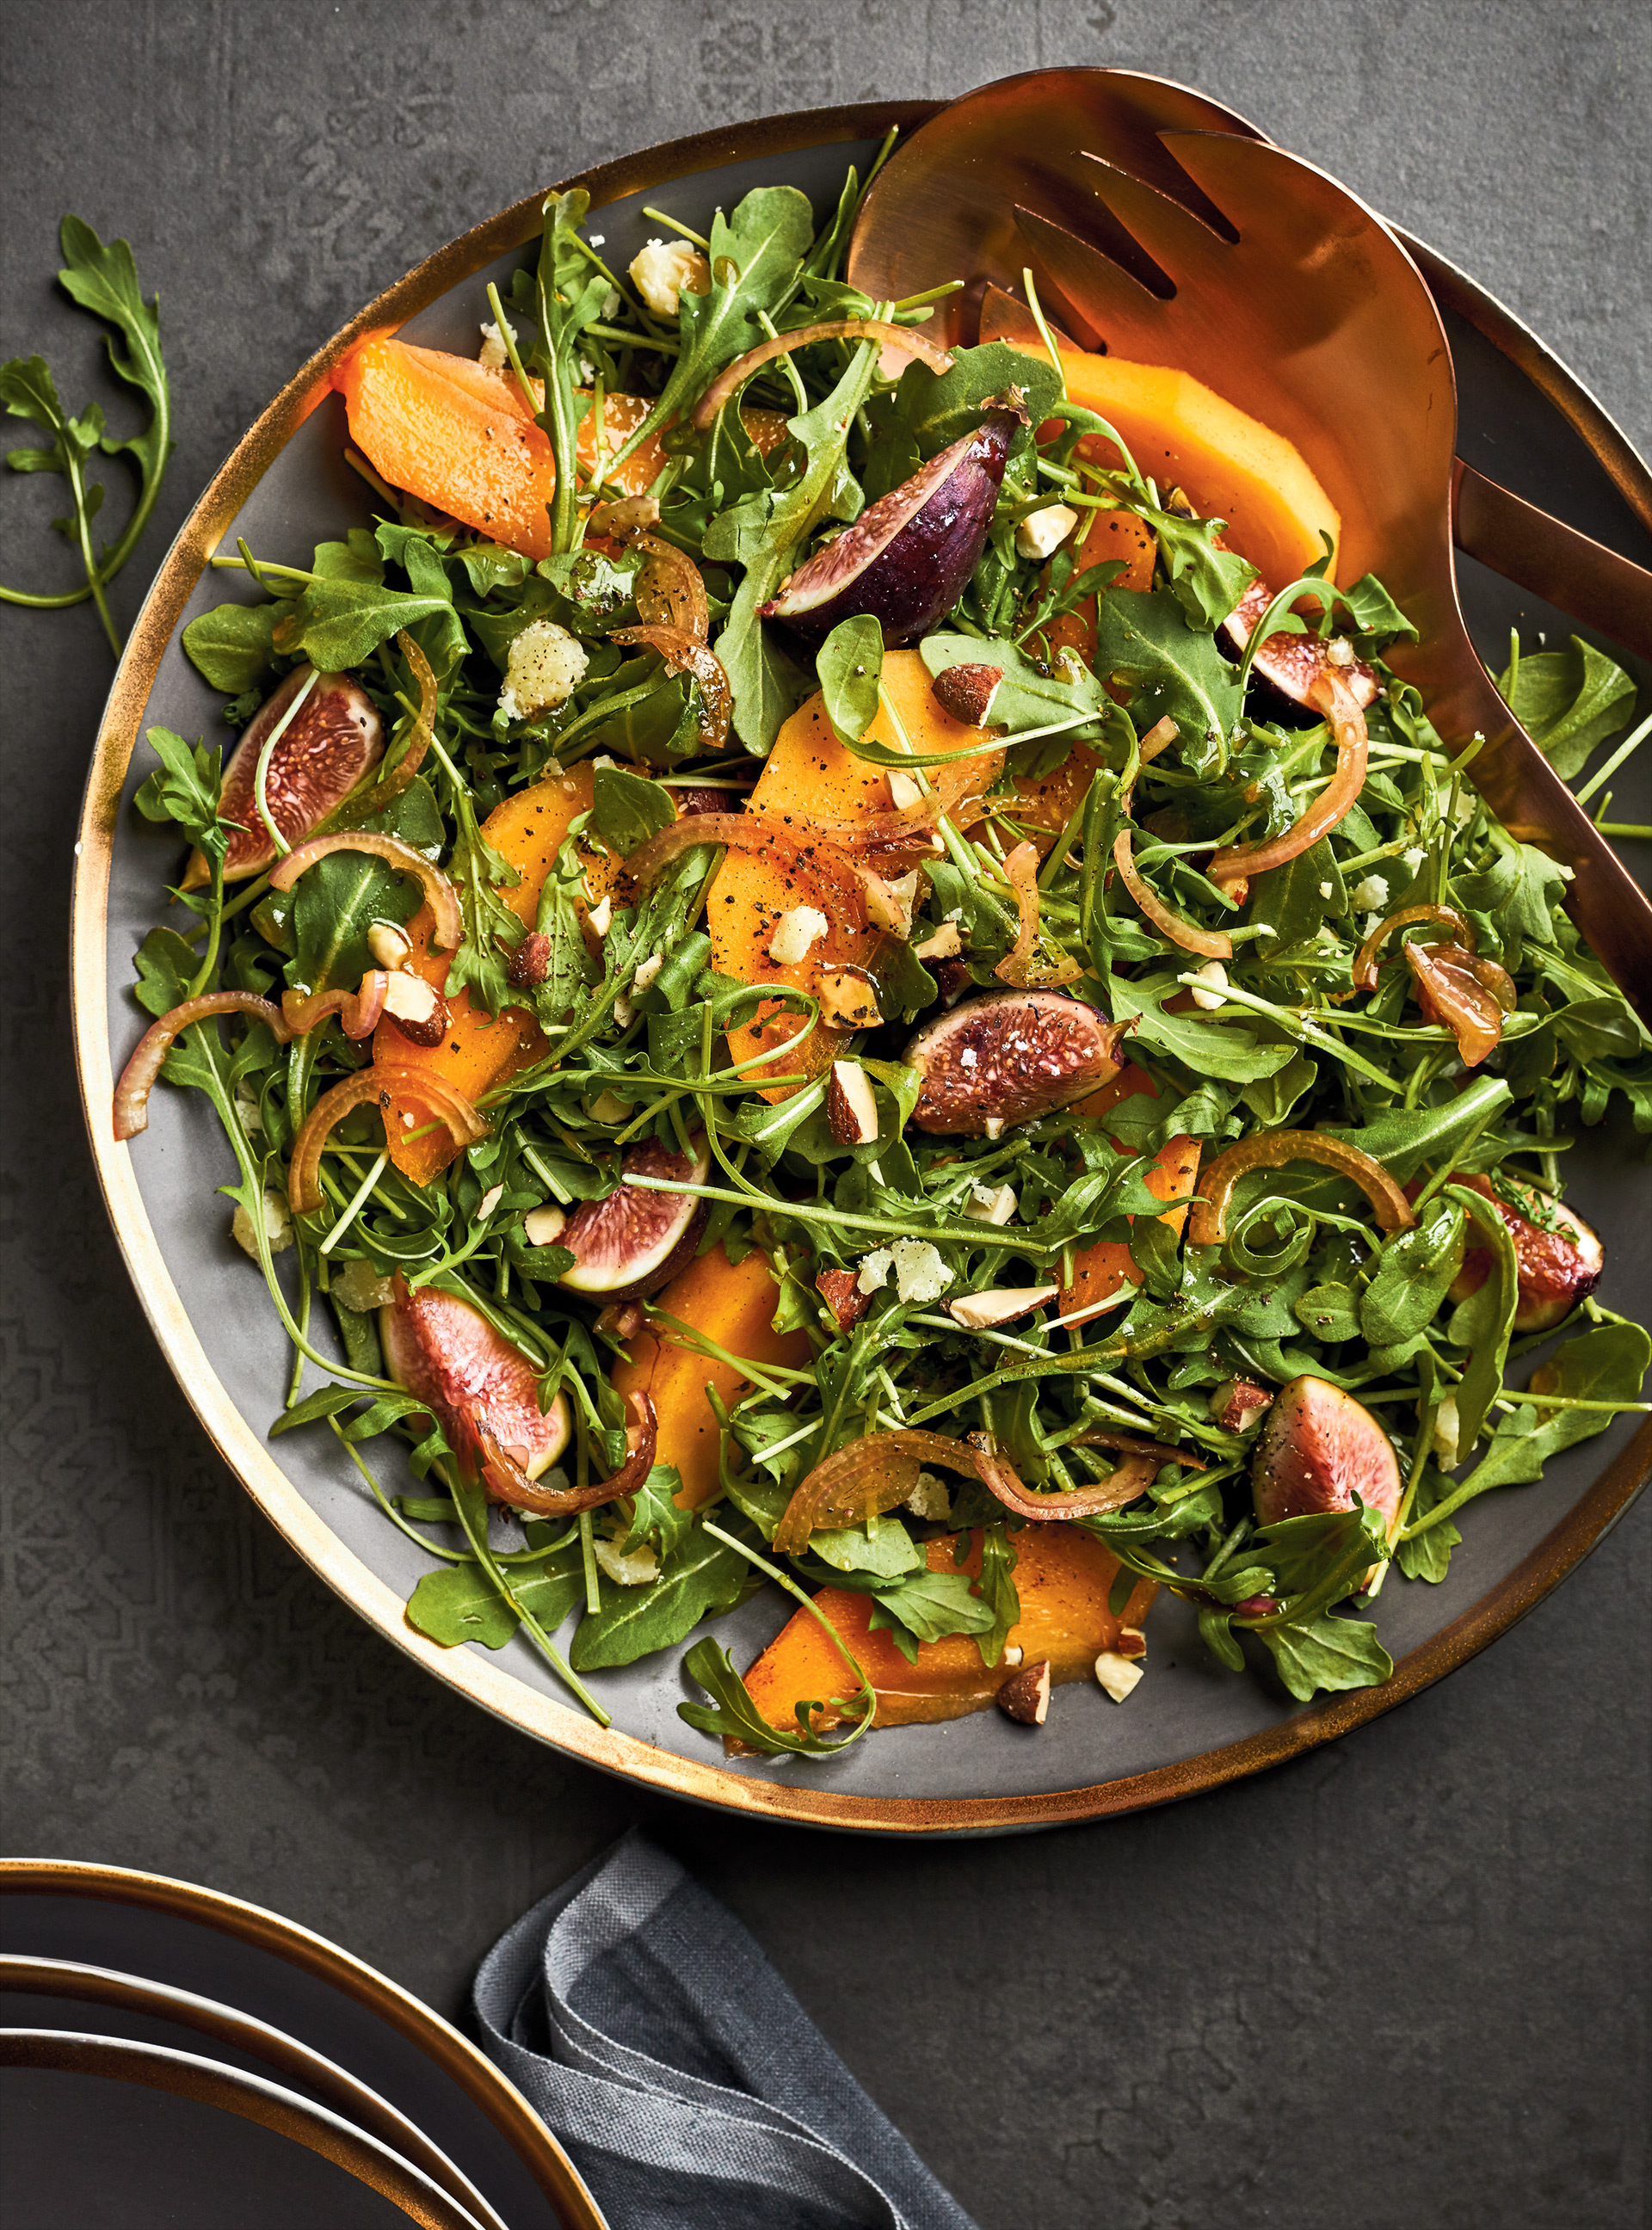 Arugula Salad with Persimmon and Almonds